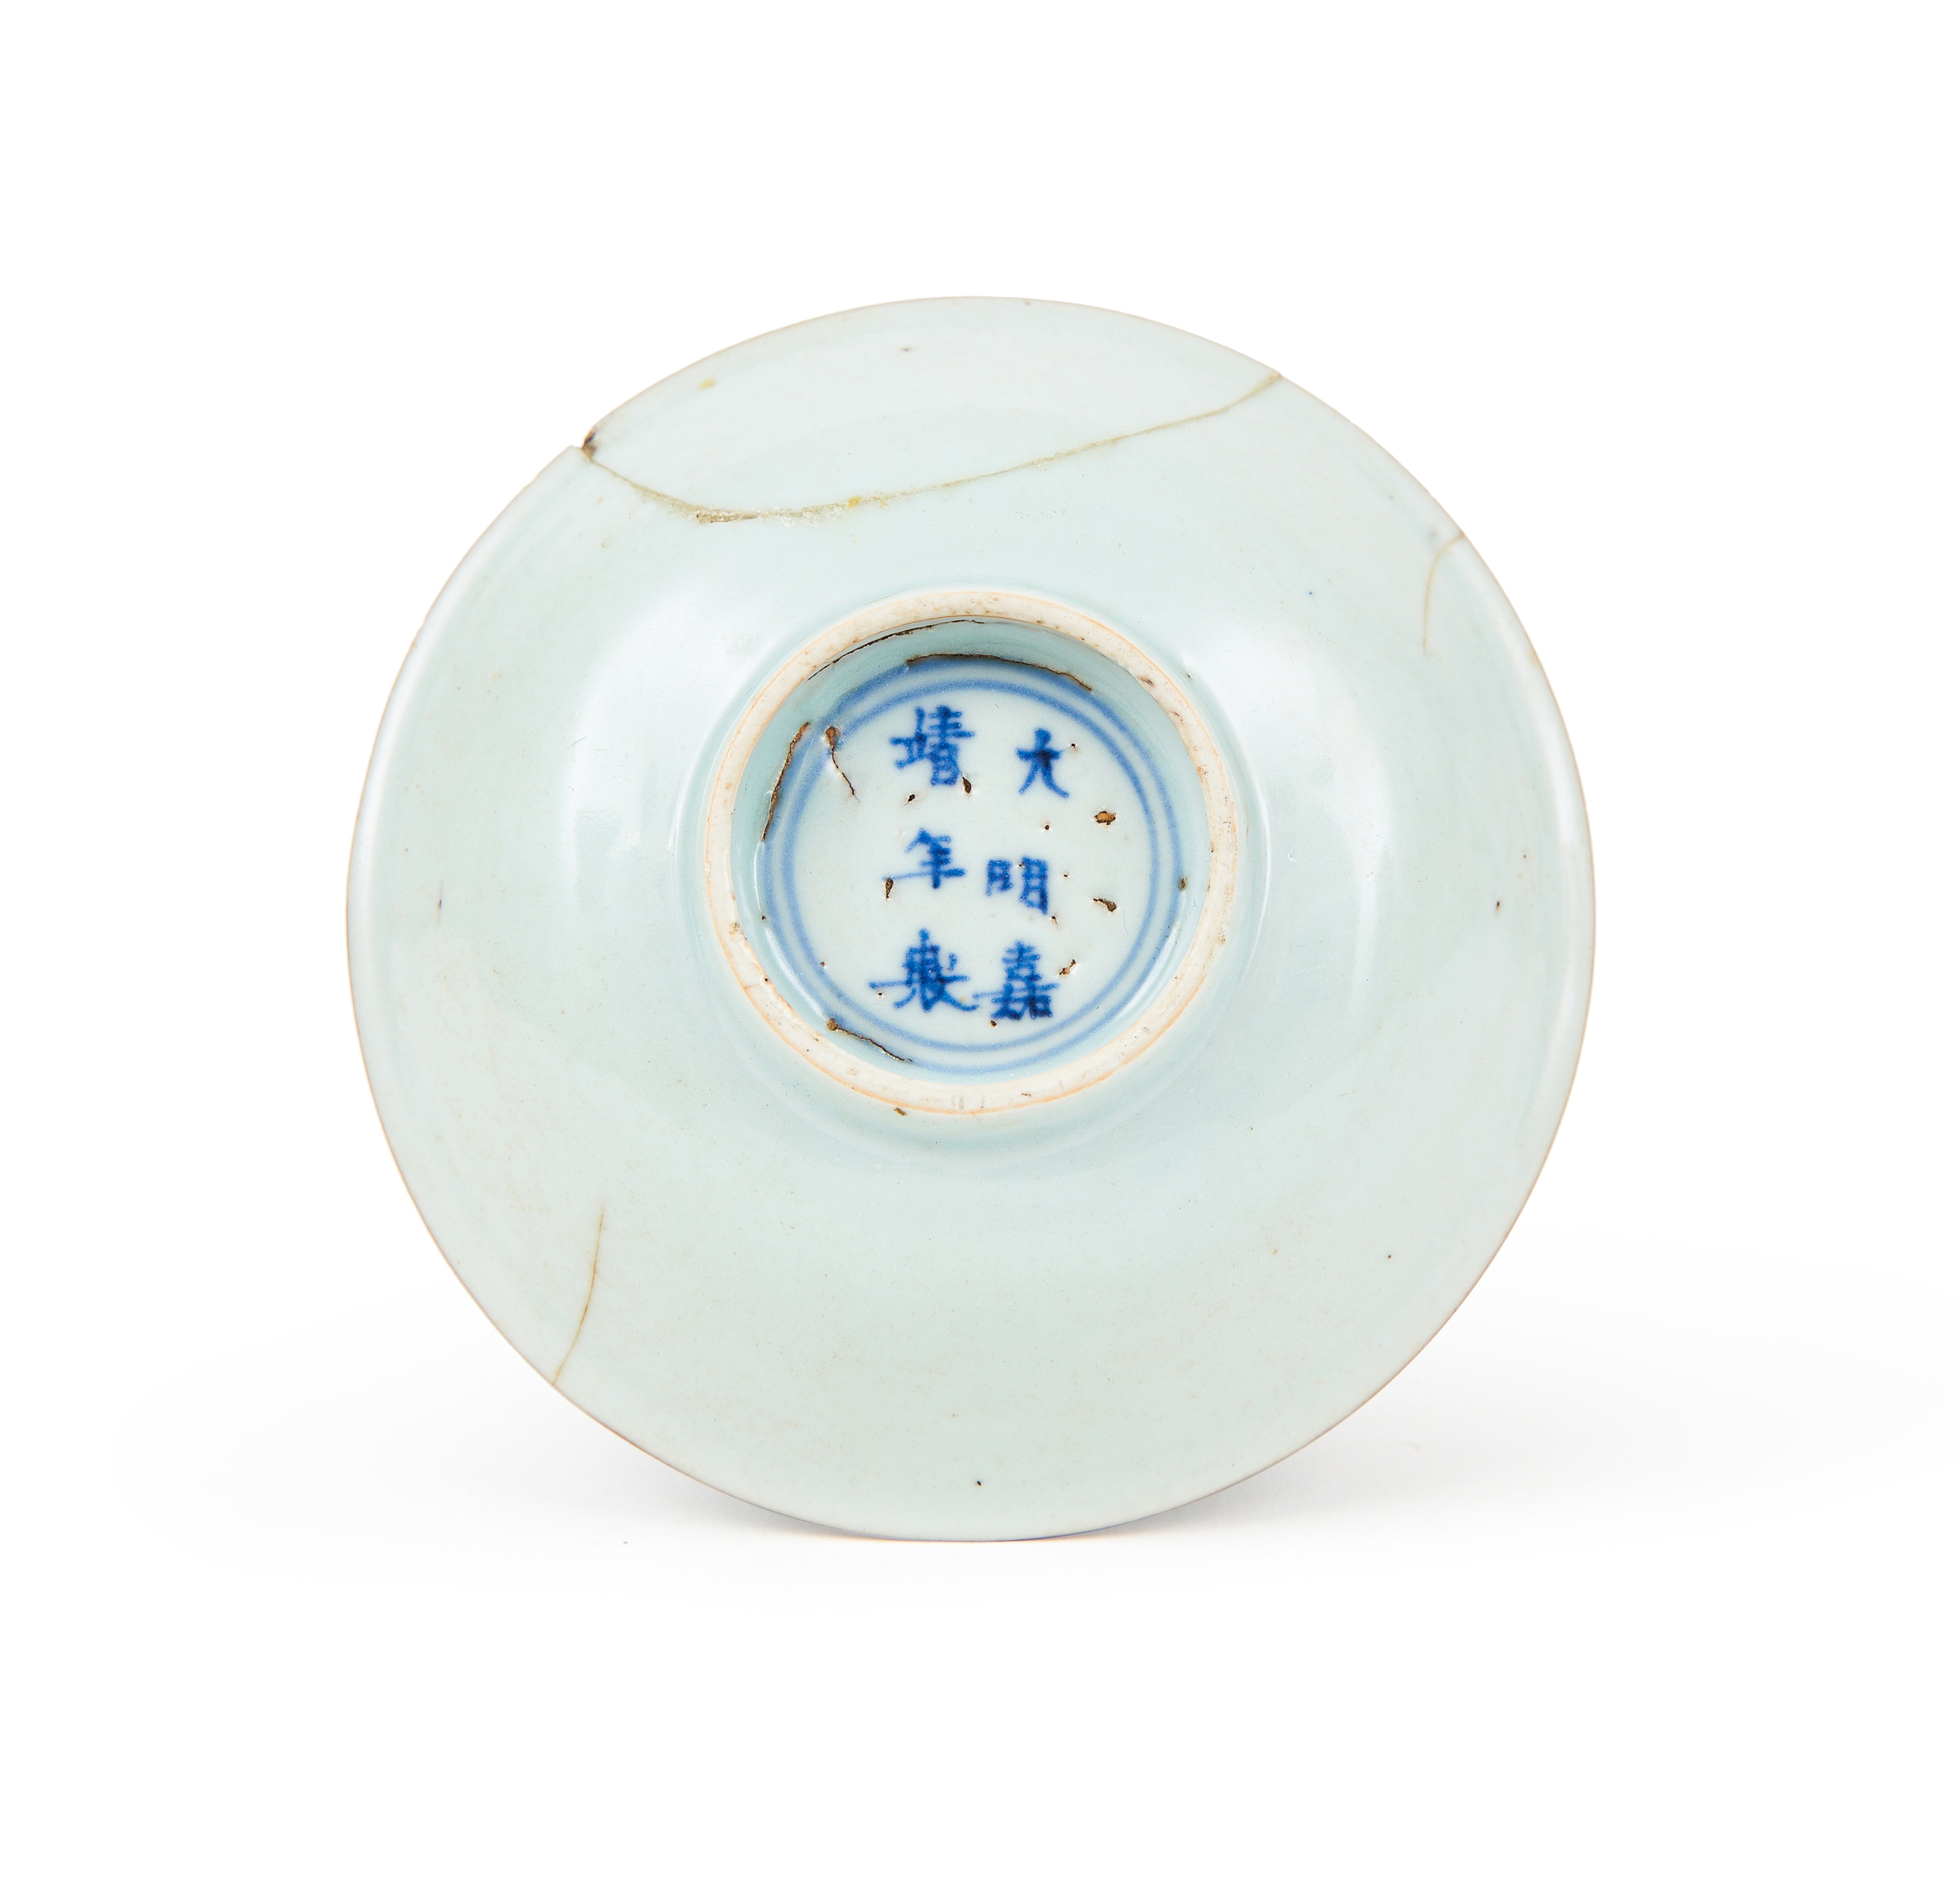 A CHINESE BLUE & WHITE INSCRIBED DISH, QING DYNASTY (1644-1911) - Image 2 of 2